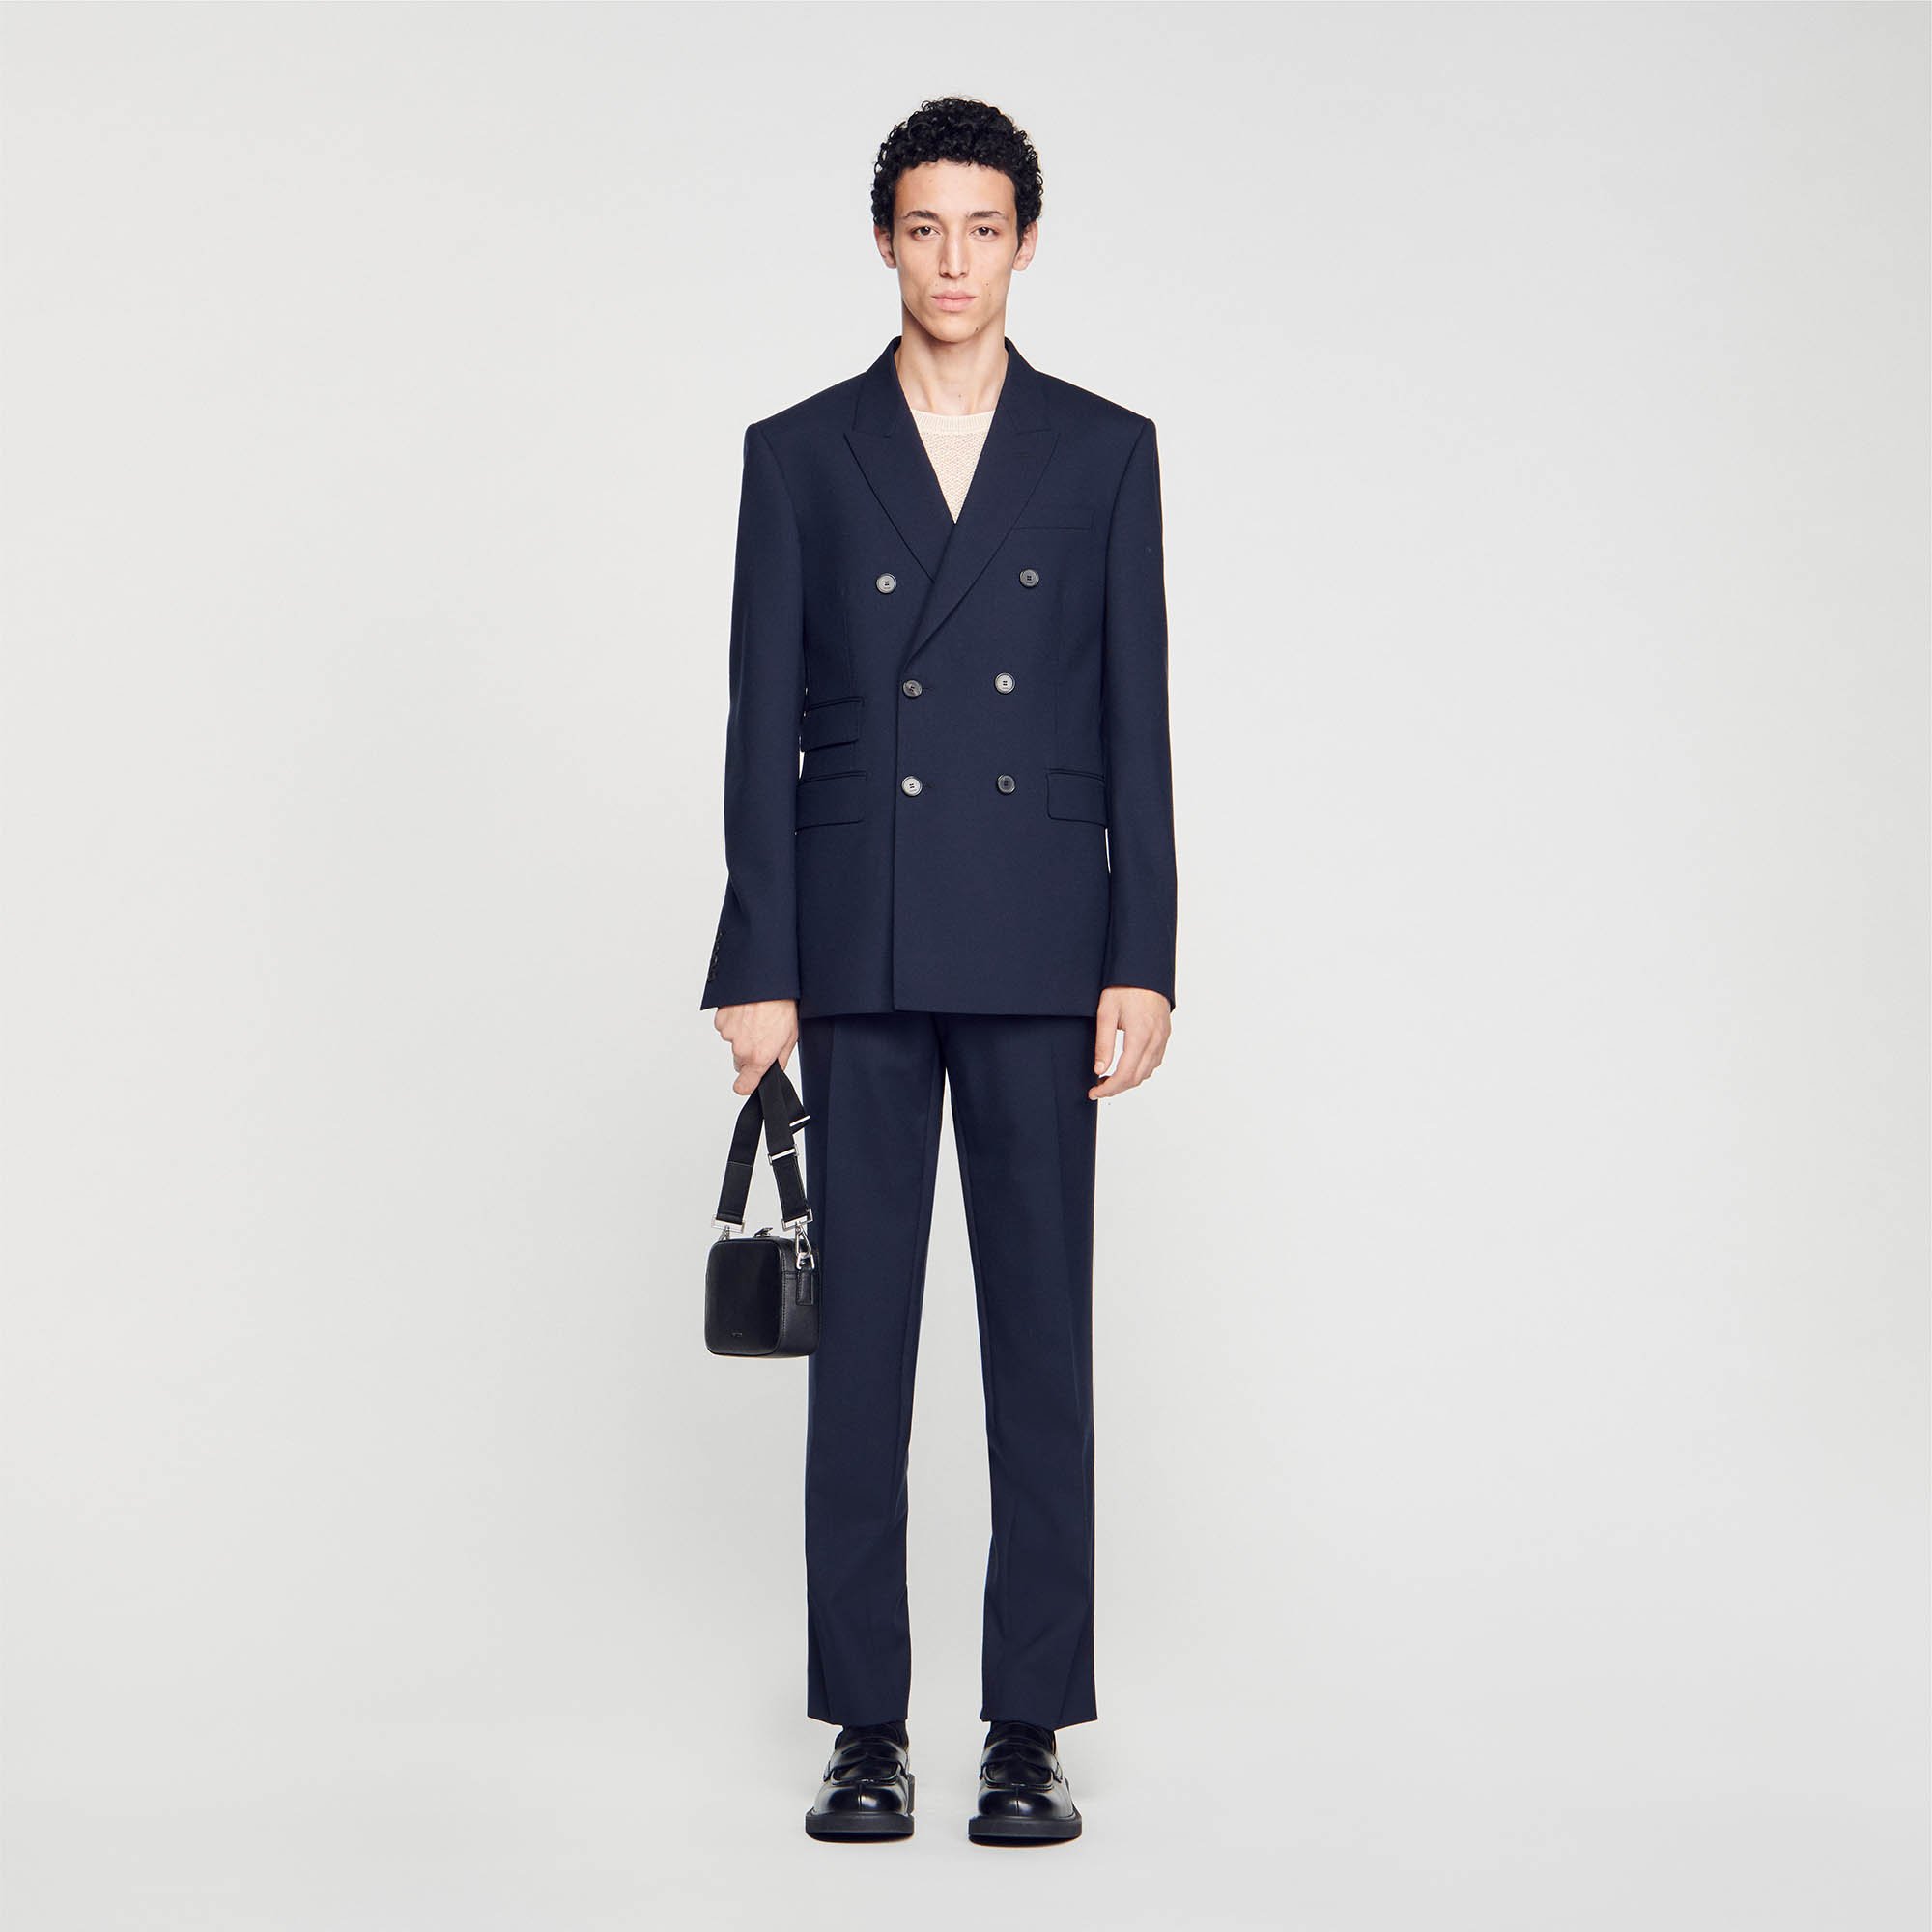 Sandro Double-breasted suit jacket